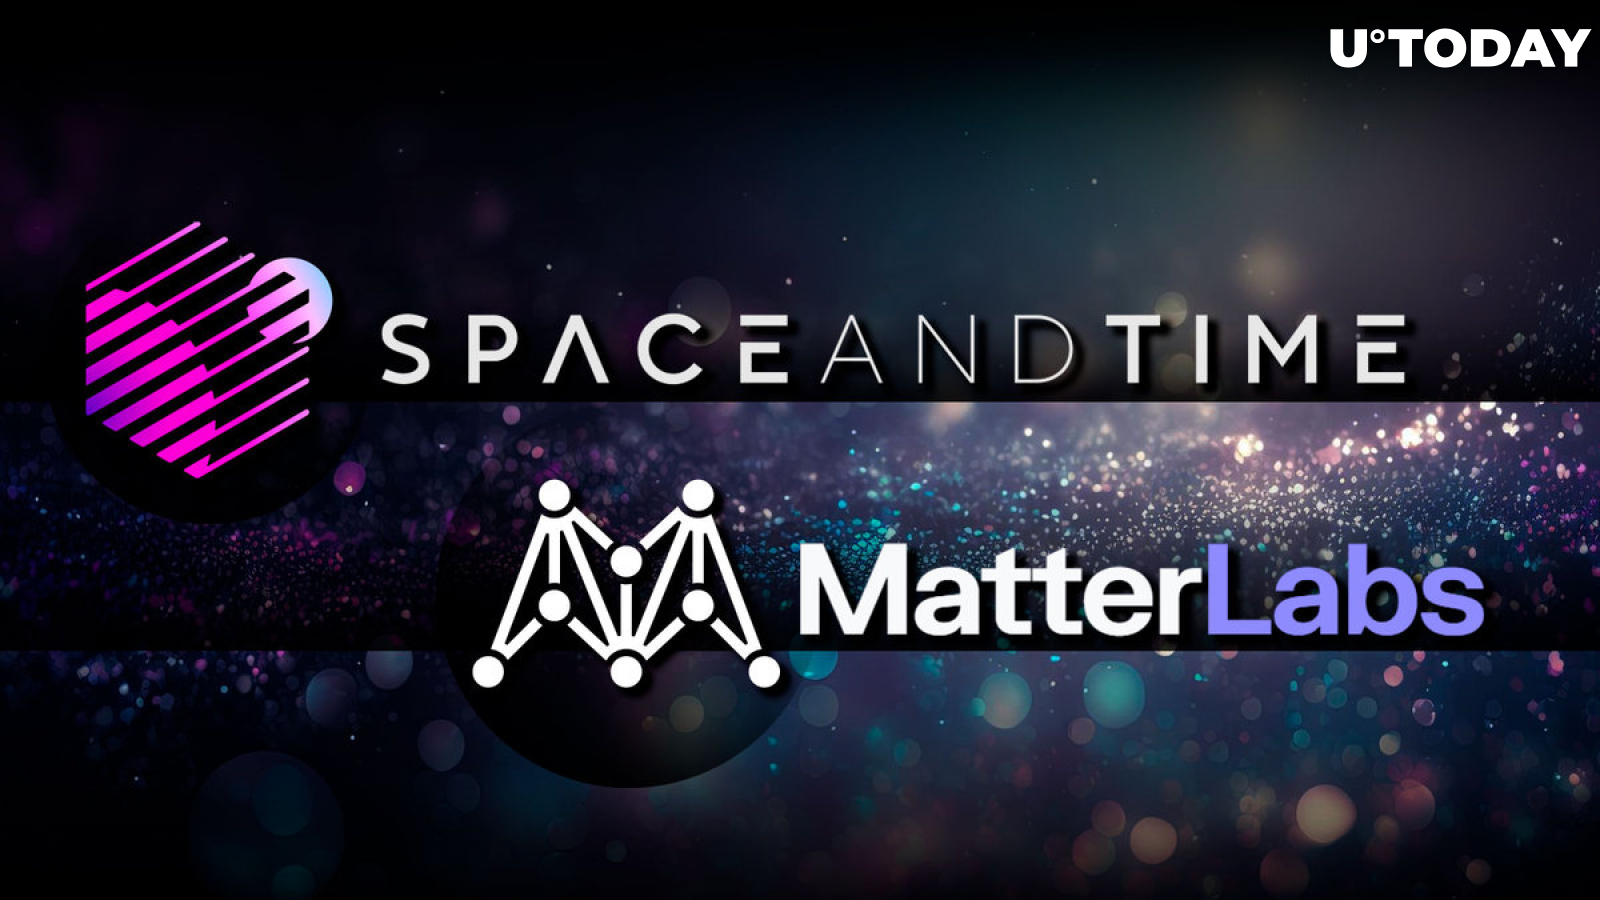 Pioneering Partnership: Space and Time and Matter Labs Enhance Ethereum Scalability With zkSync Integration